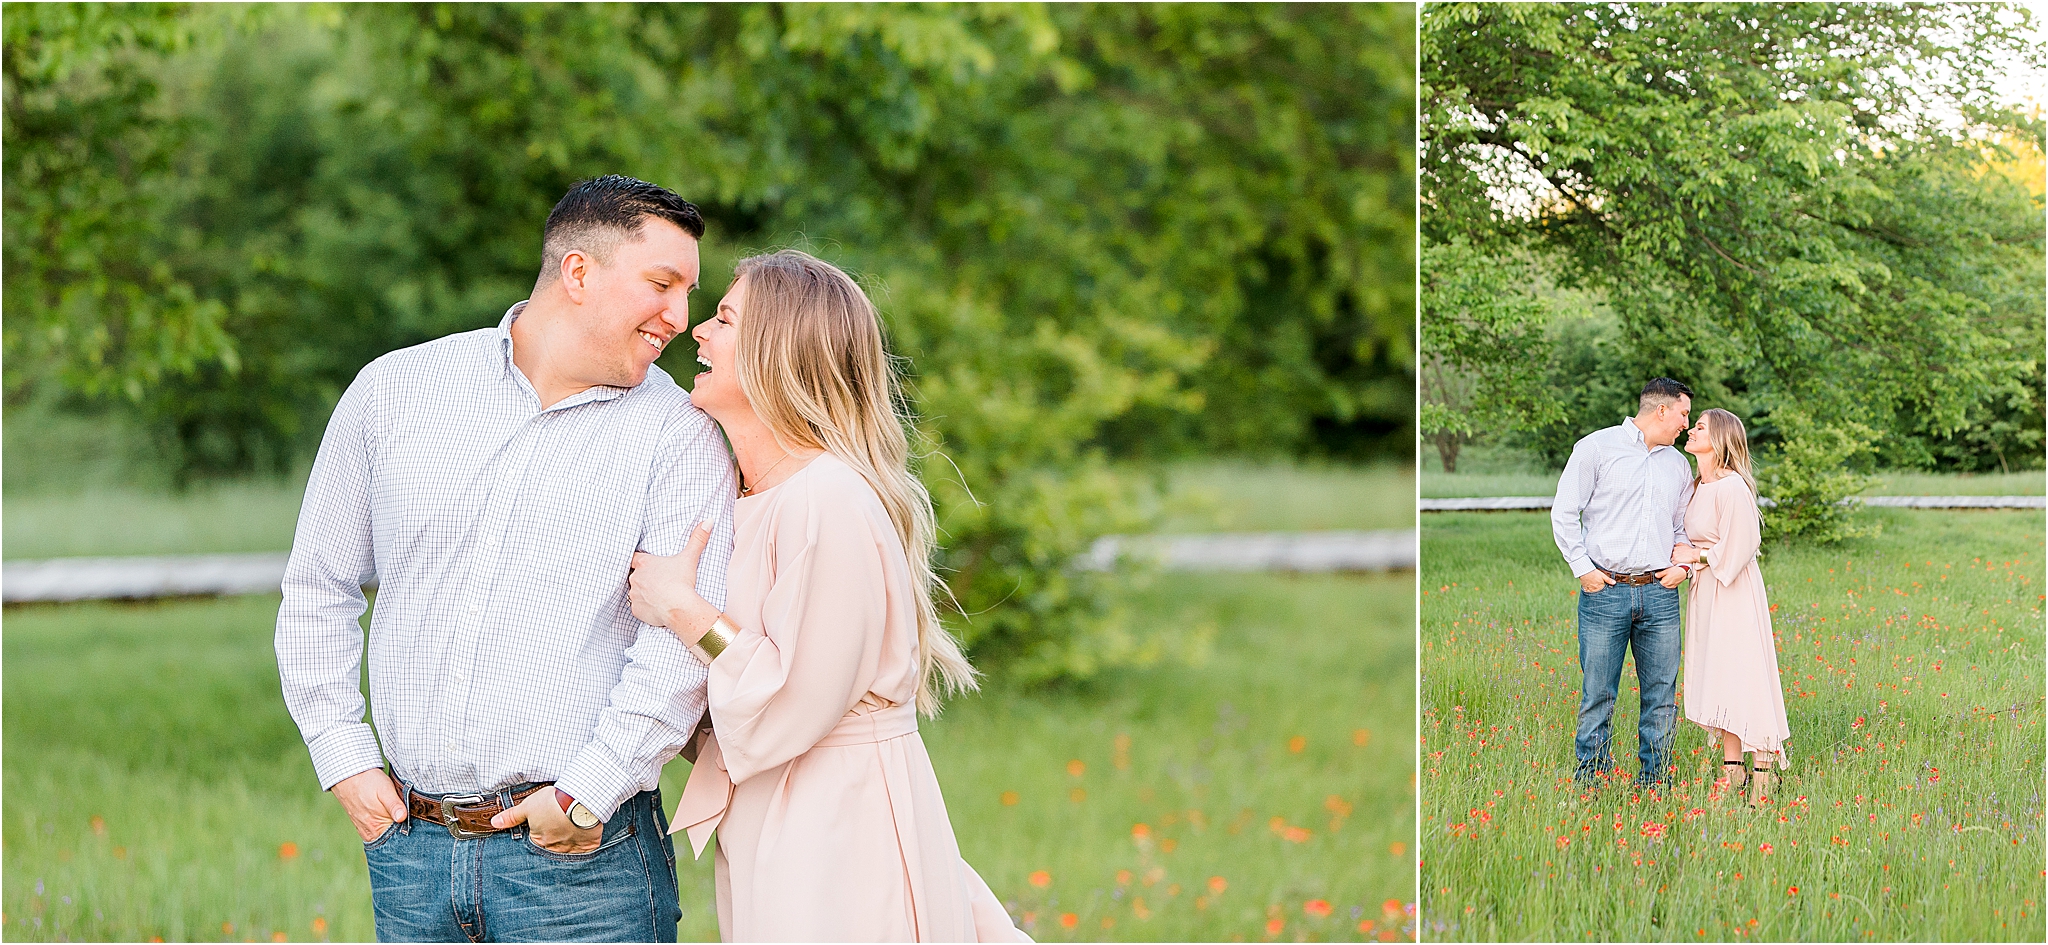 An engaged couple looking at each other nose to nose in green field surrounded by trees for their Fort Worth Engagement Session 